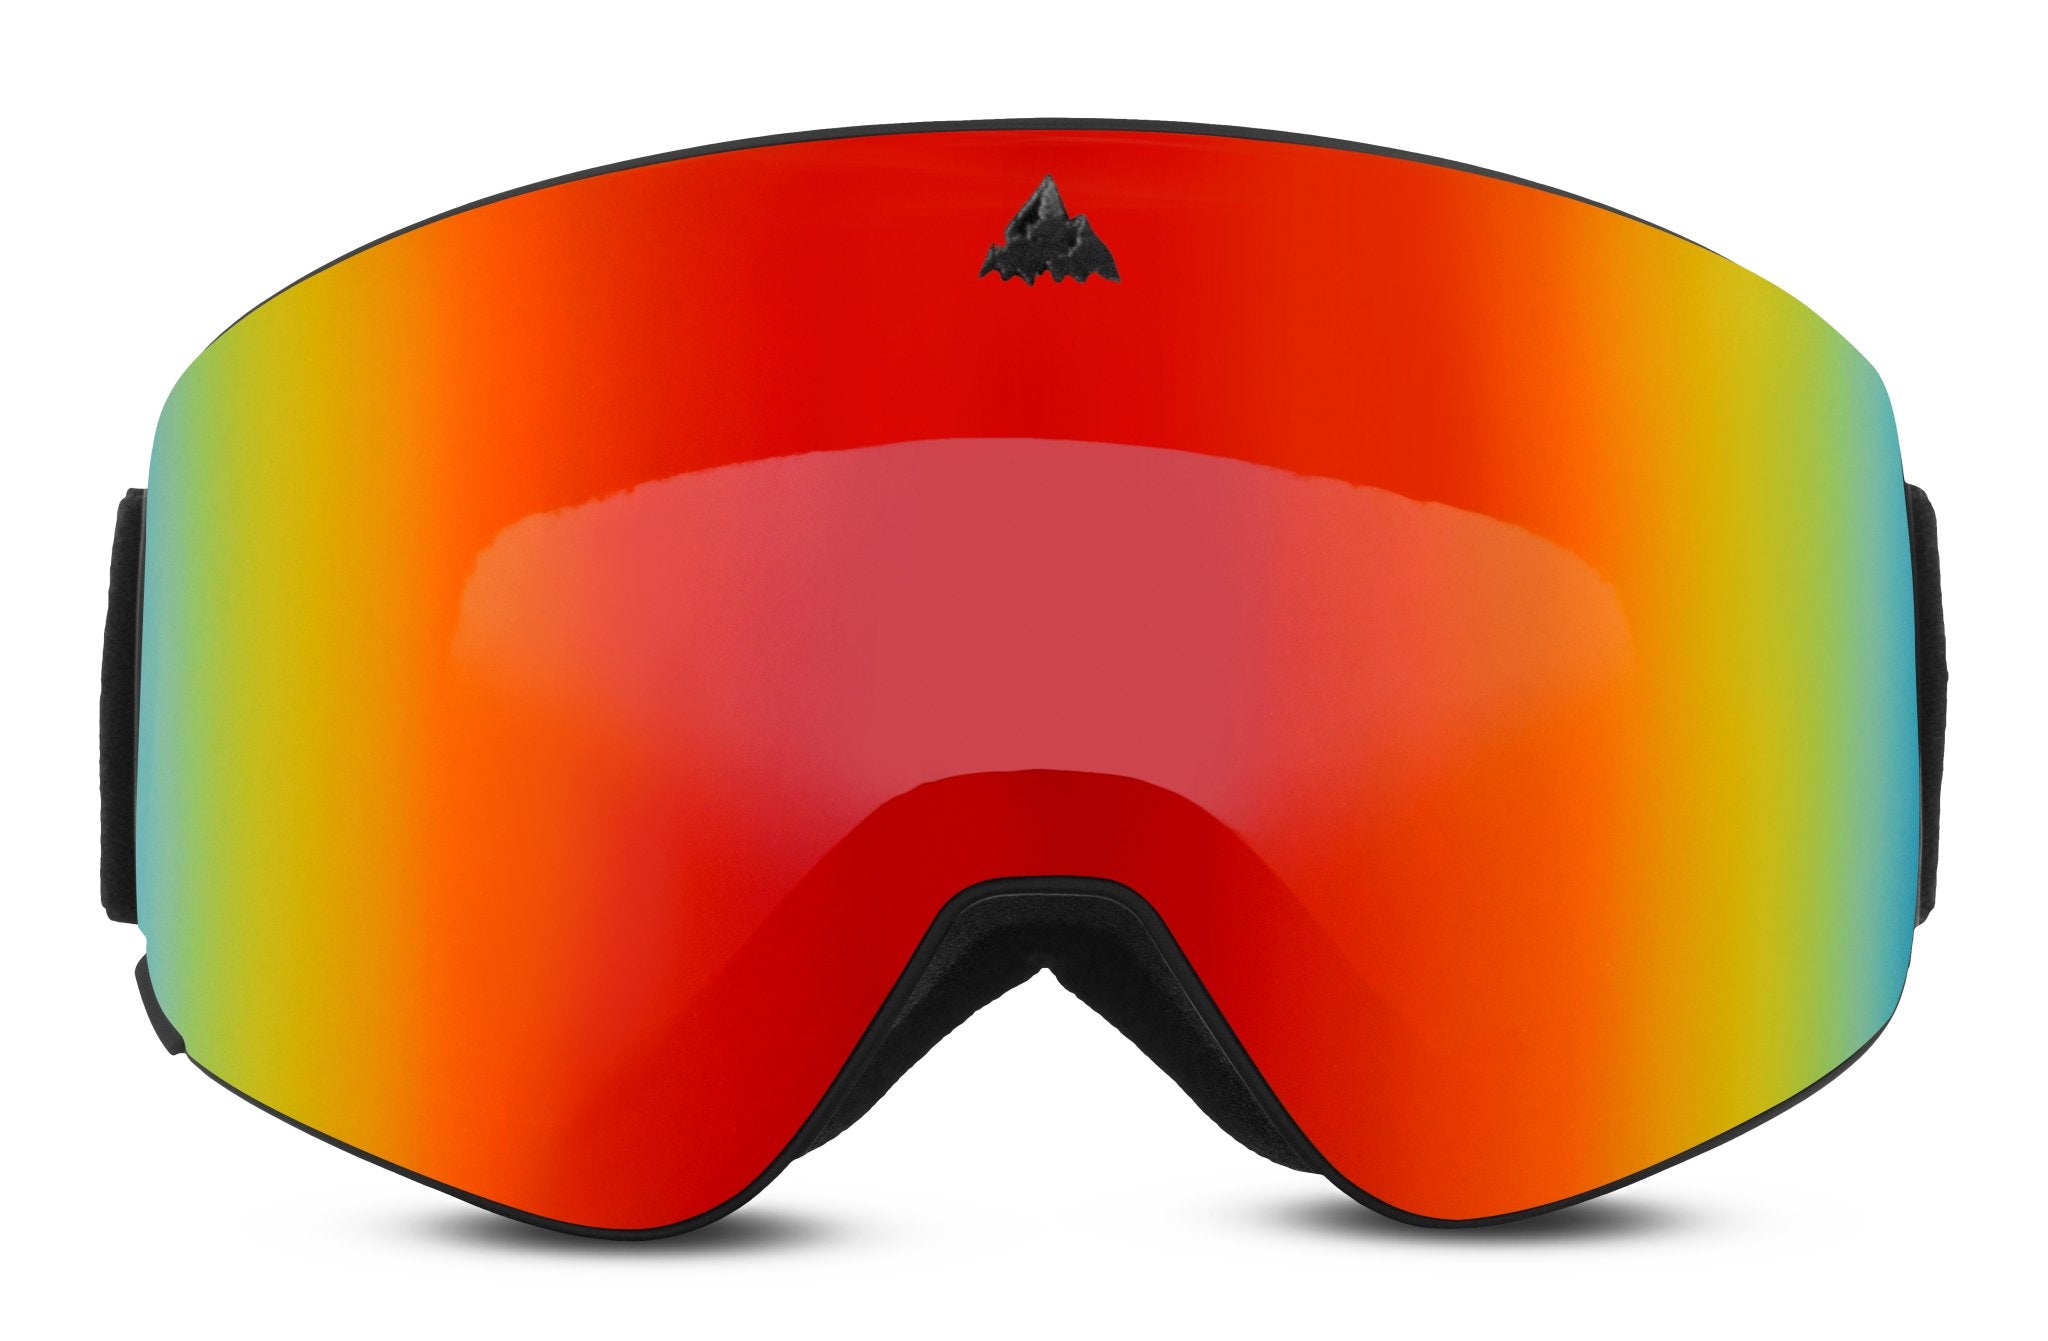 Uprising Goggles - Classic Edition - Teton Gravity Research #color_triflection red